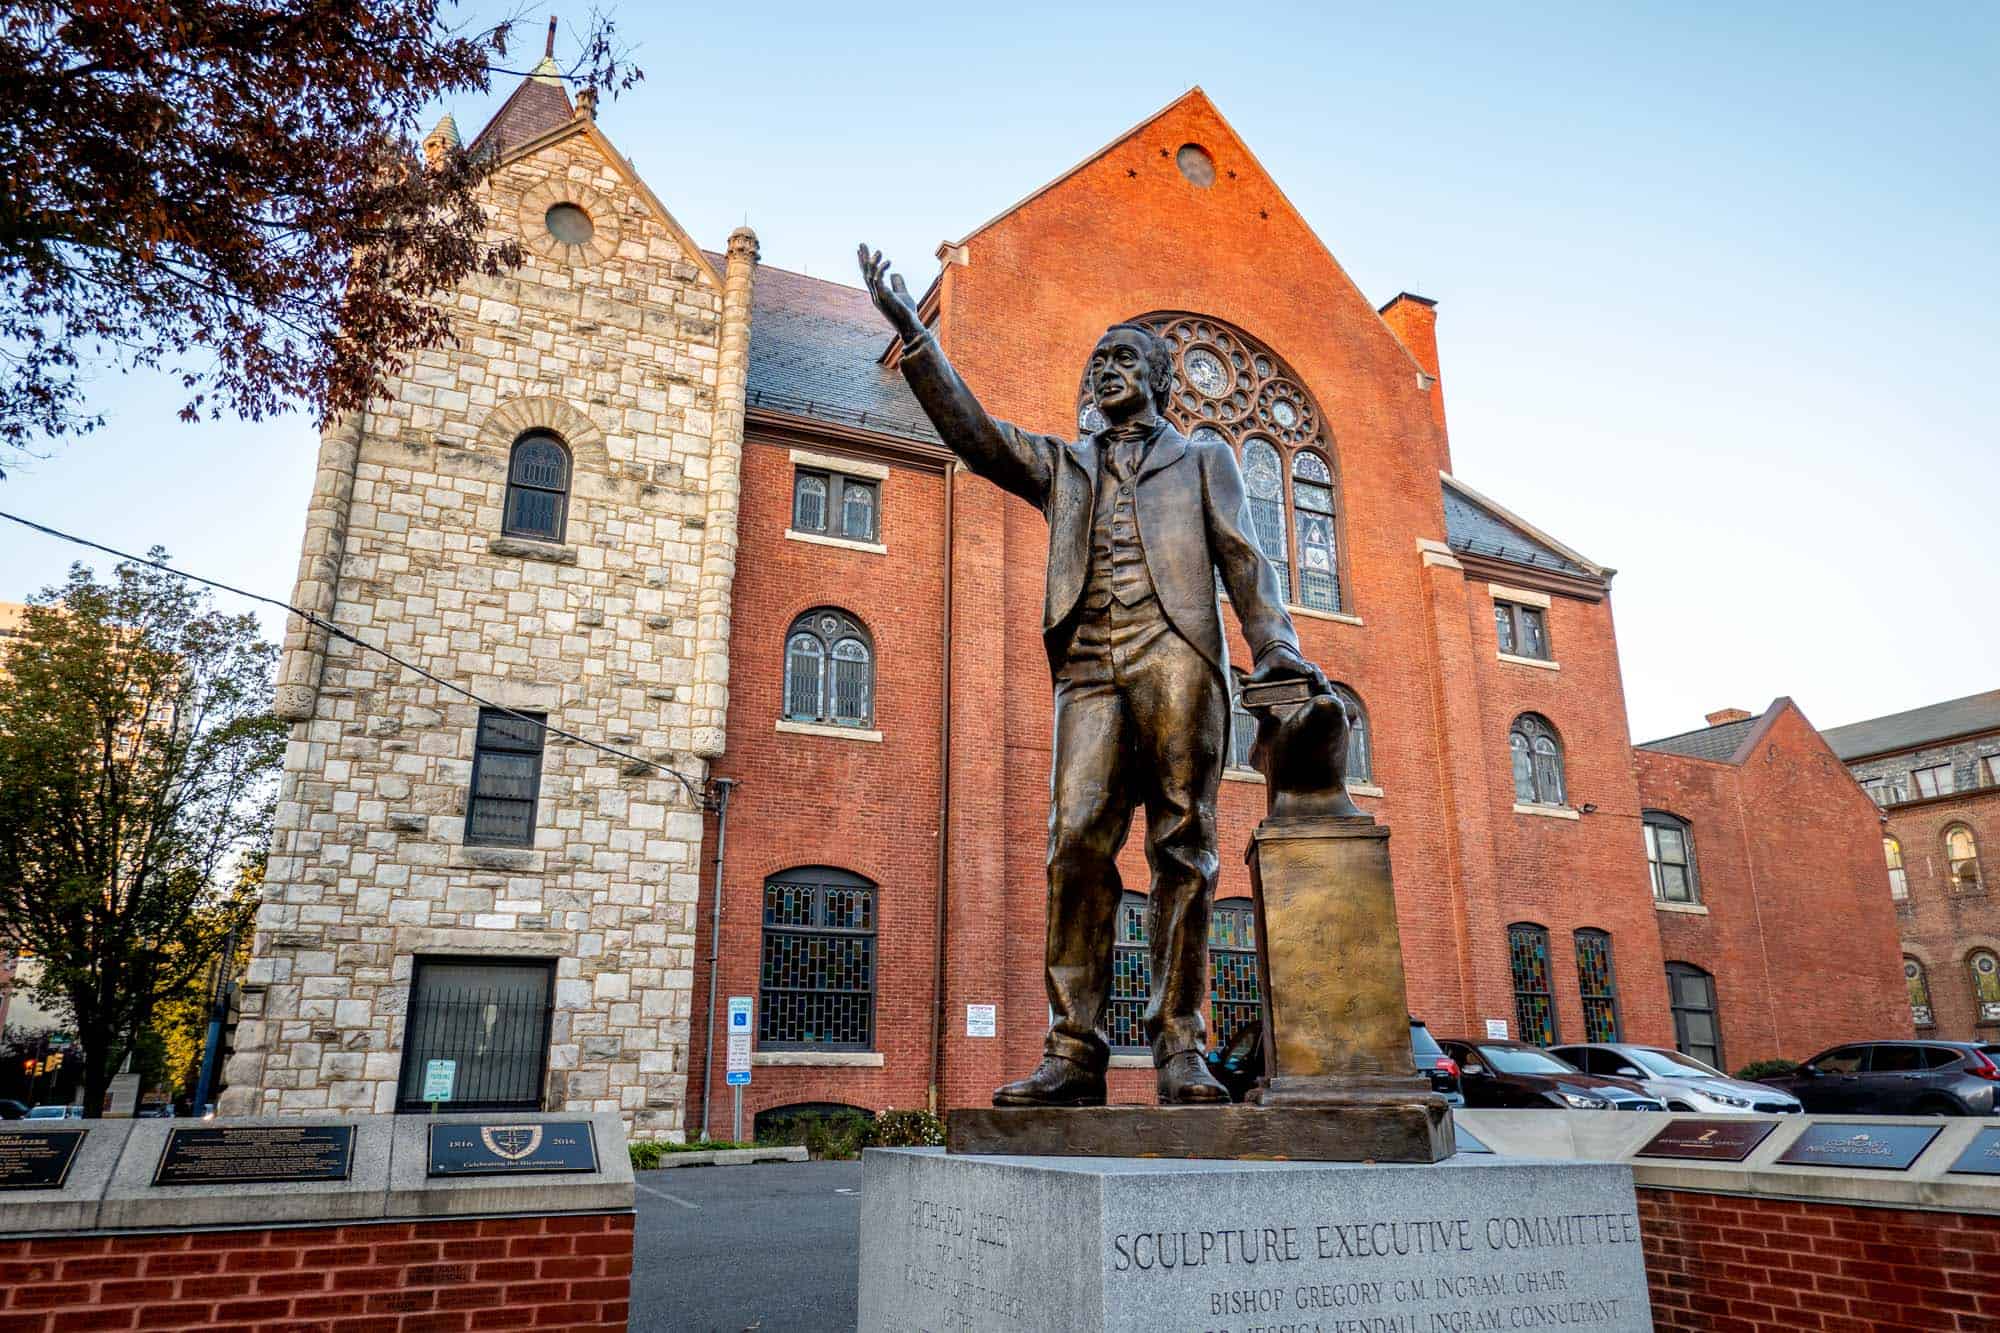 Bronze statue of a man with his arm raised outside a red brick building with stained glass